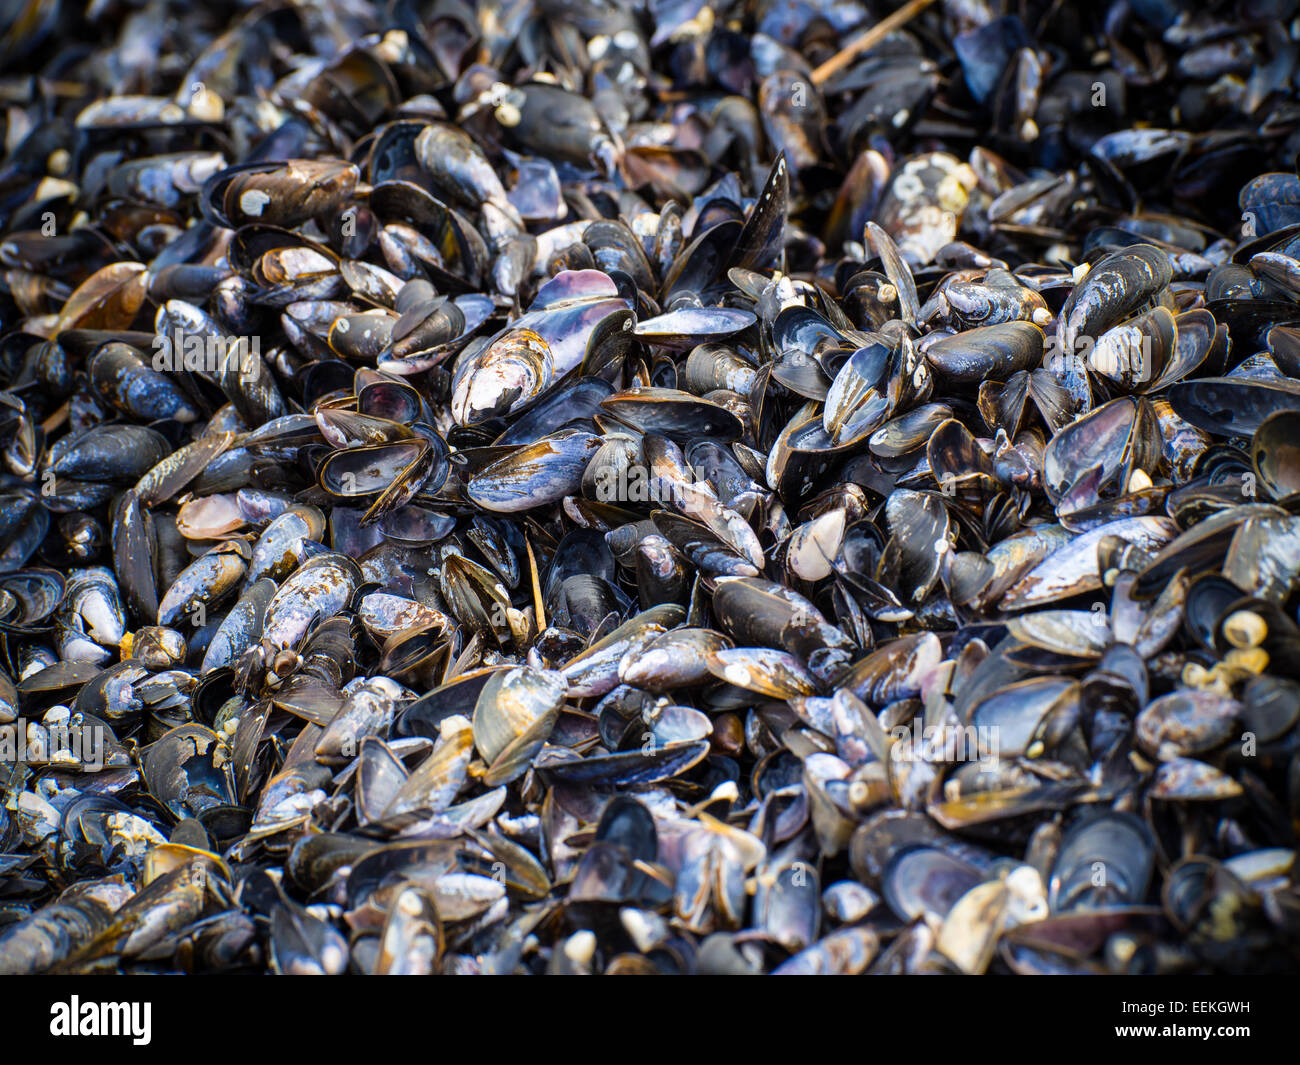 A pile of mussels Stock Photo